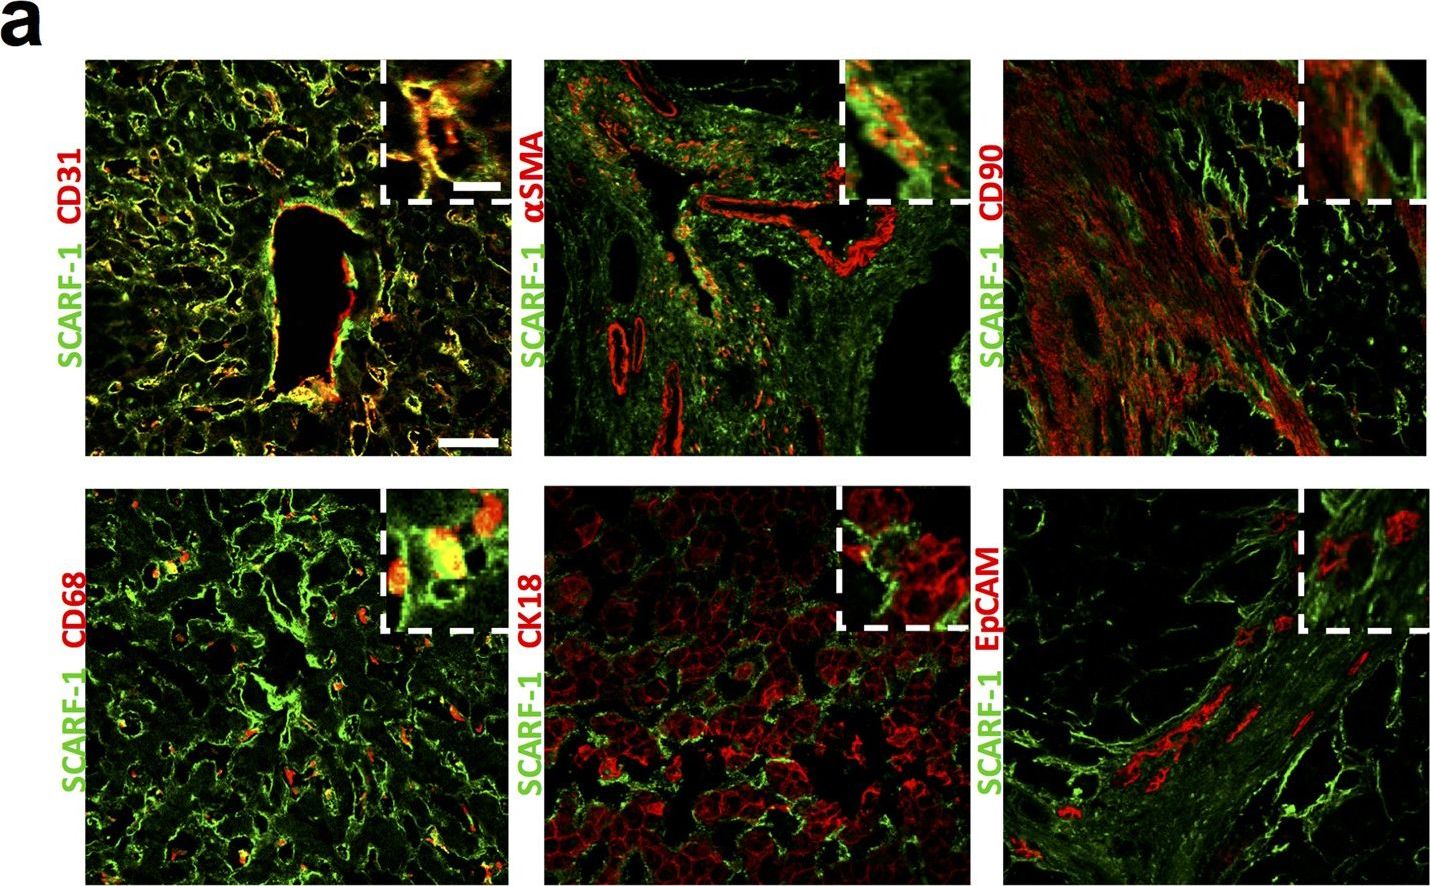 SCARF-1 promotes adhesion of CD4+ T cells to human hepatic sinusoidal endothelium under conditions of shear stress.